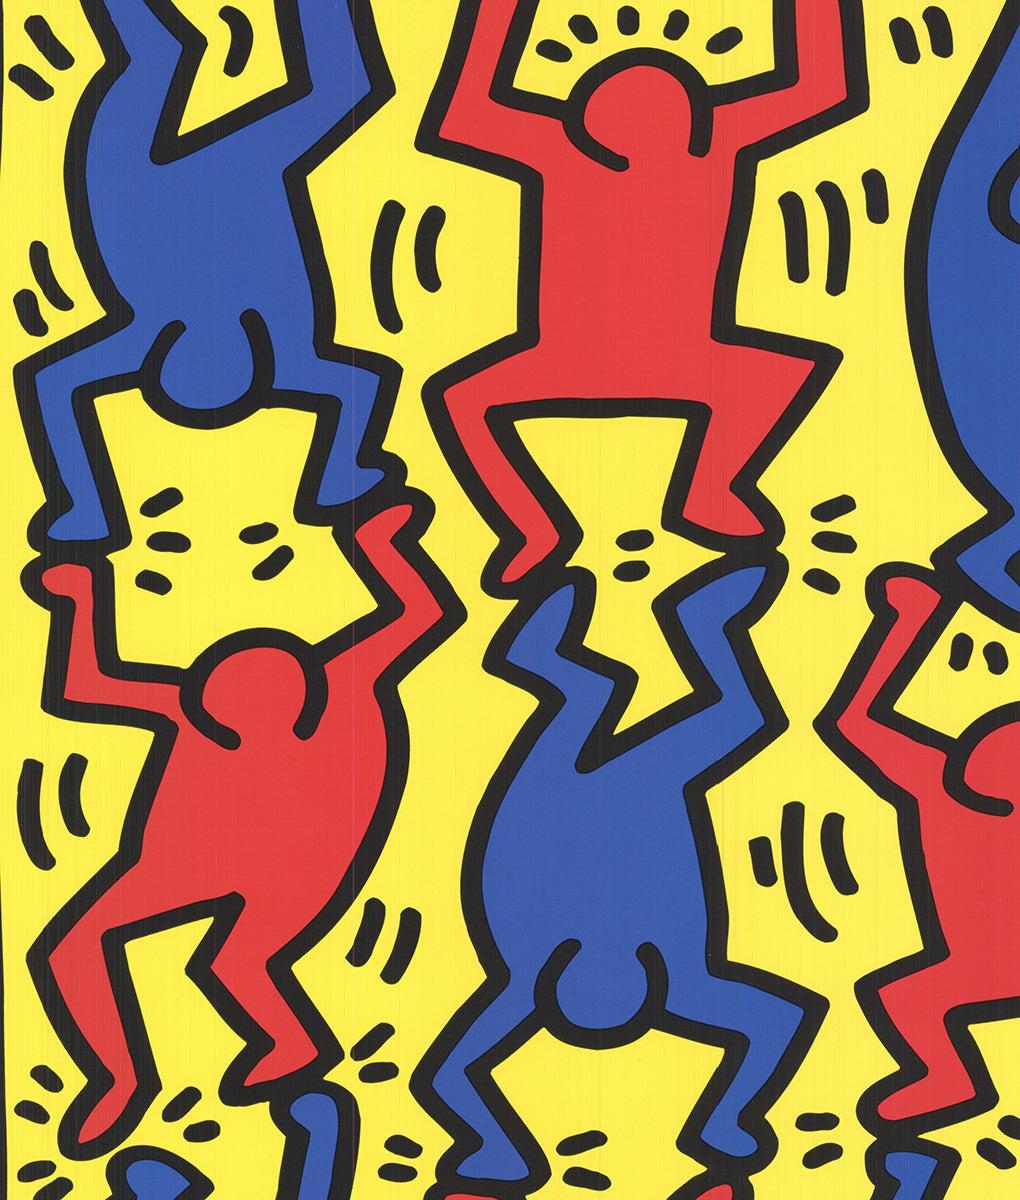 Keith Haring 'Untitled, 1988' 2008- Lithographie offset en vente 2